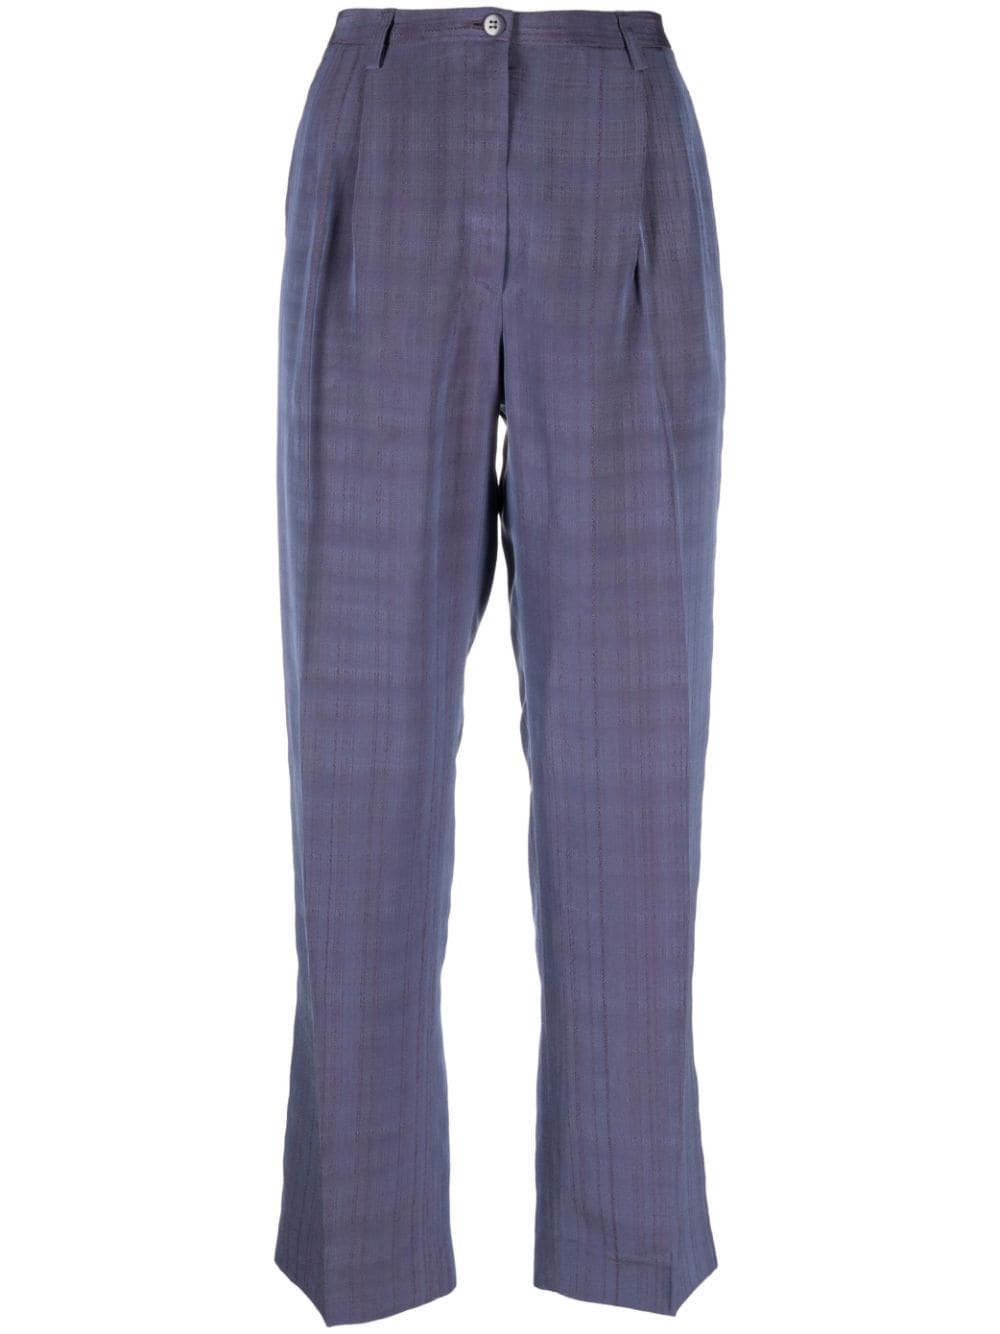 2000s iridescent effect plaid trousers